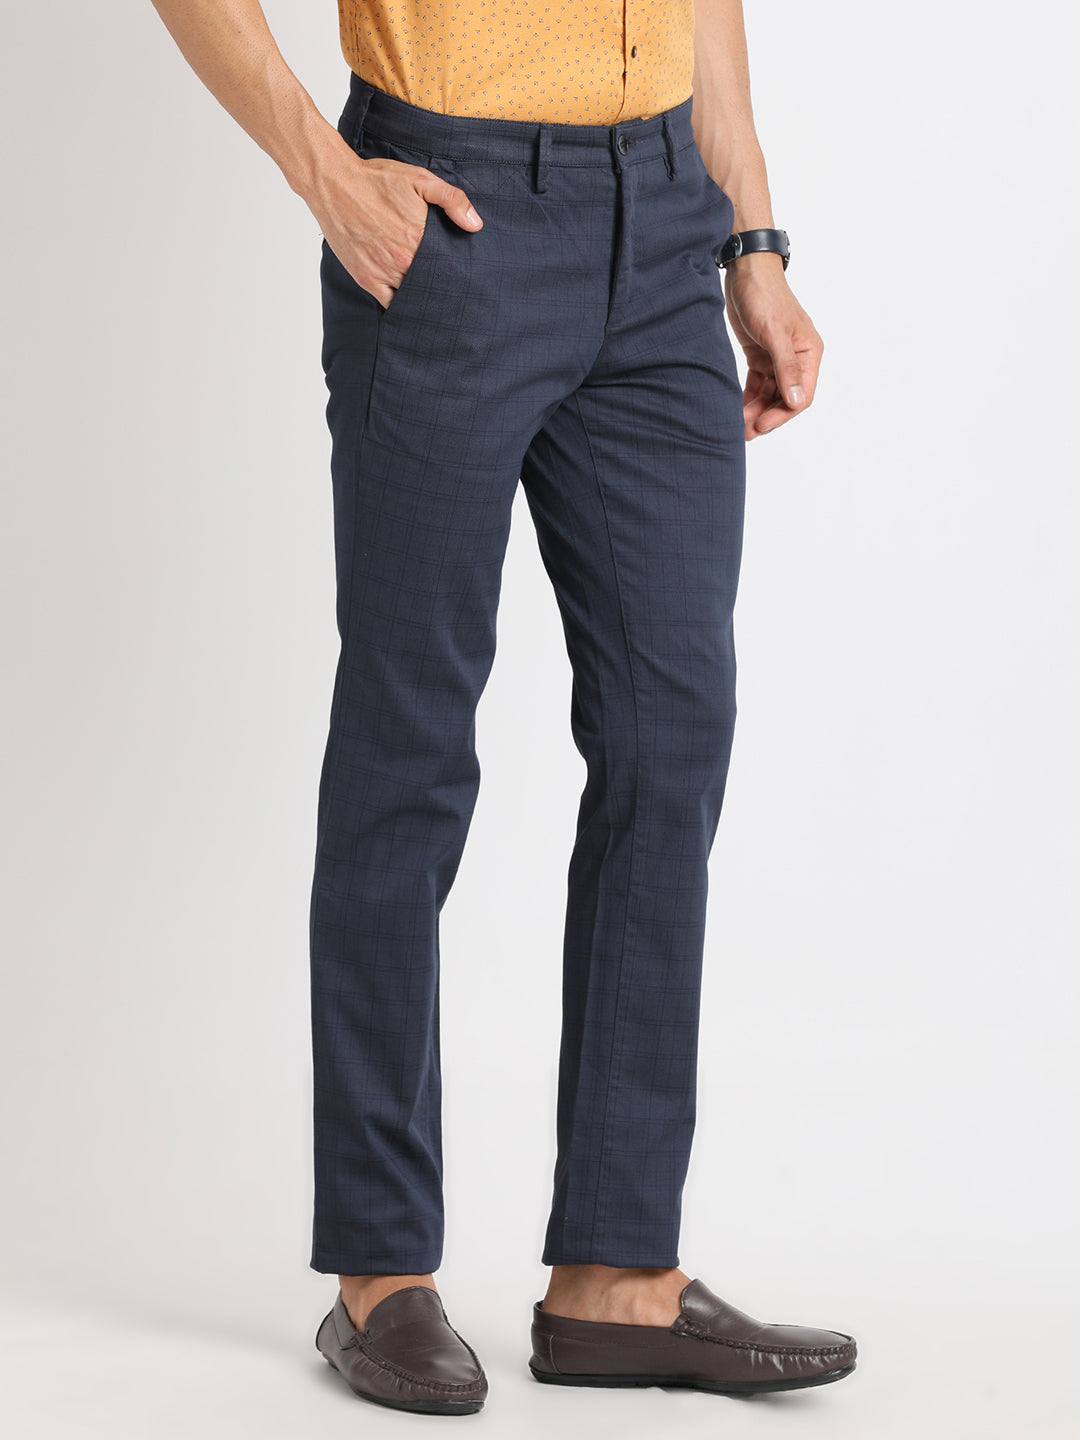 Cotton Stretch Navy Blue Checkered Ultra Slim Fit Flat Front Casual Trouser